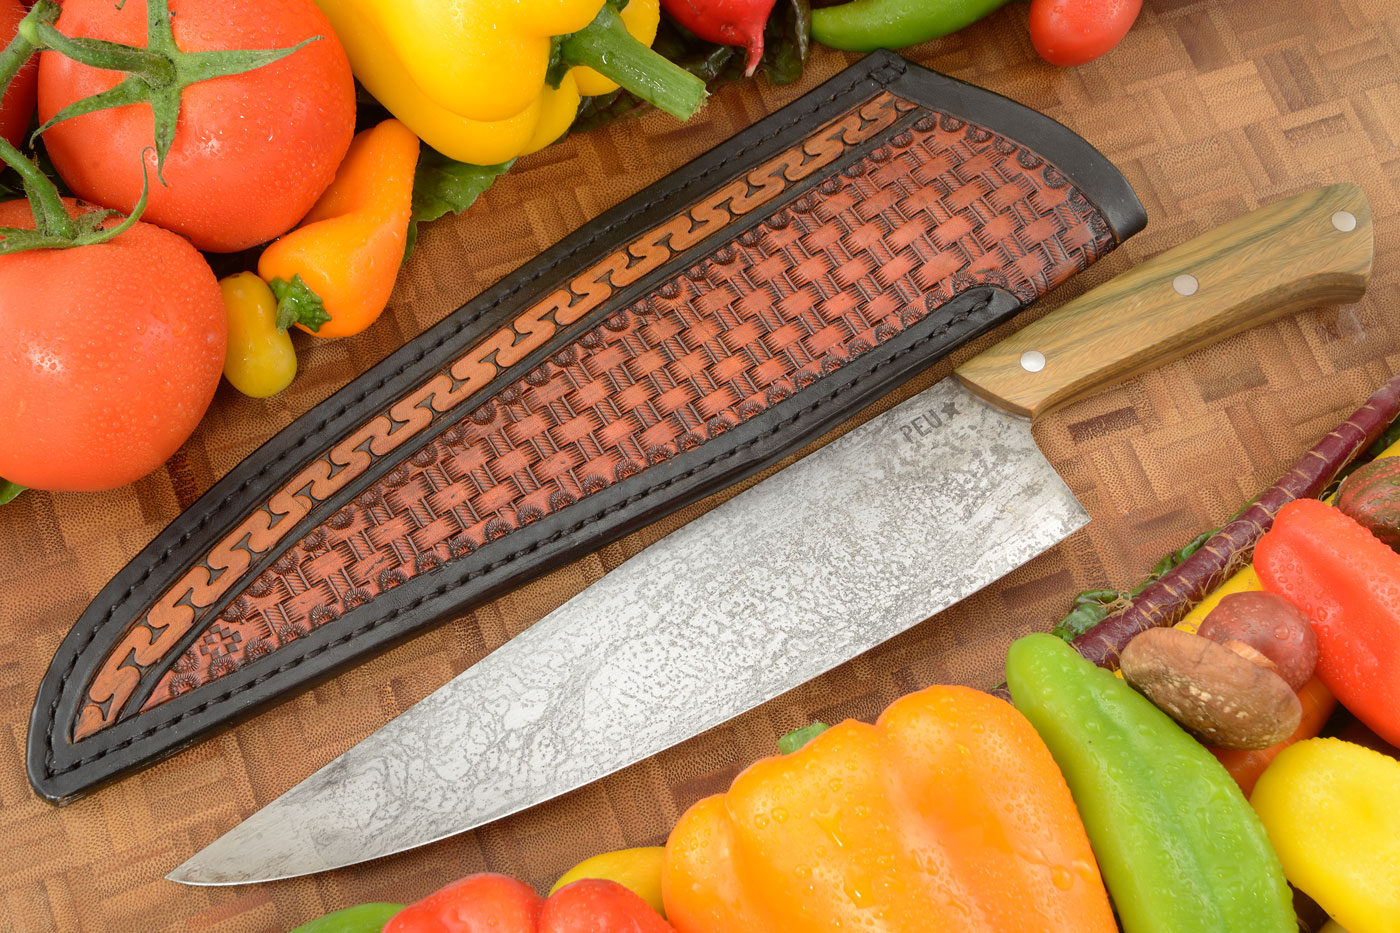 Chef's Knife (Cocinero 230mm) with Pau Santo and O2 Carbon Steel